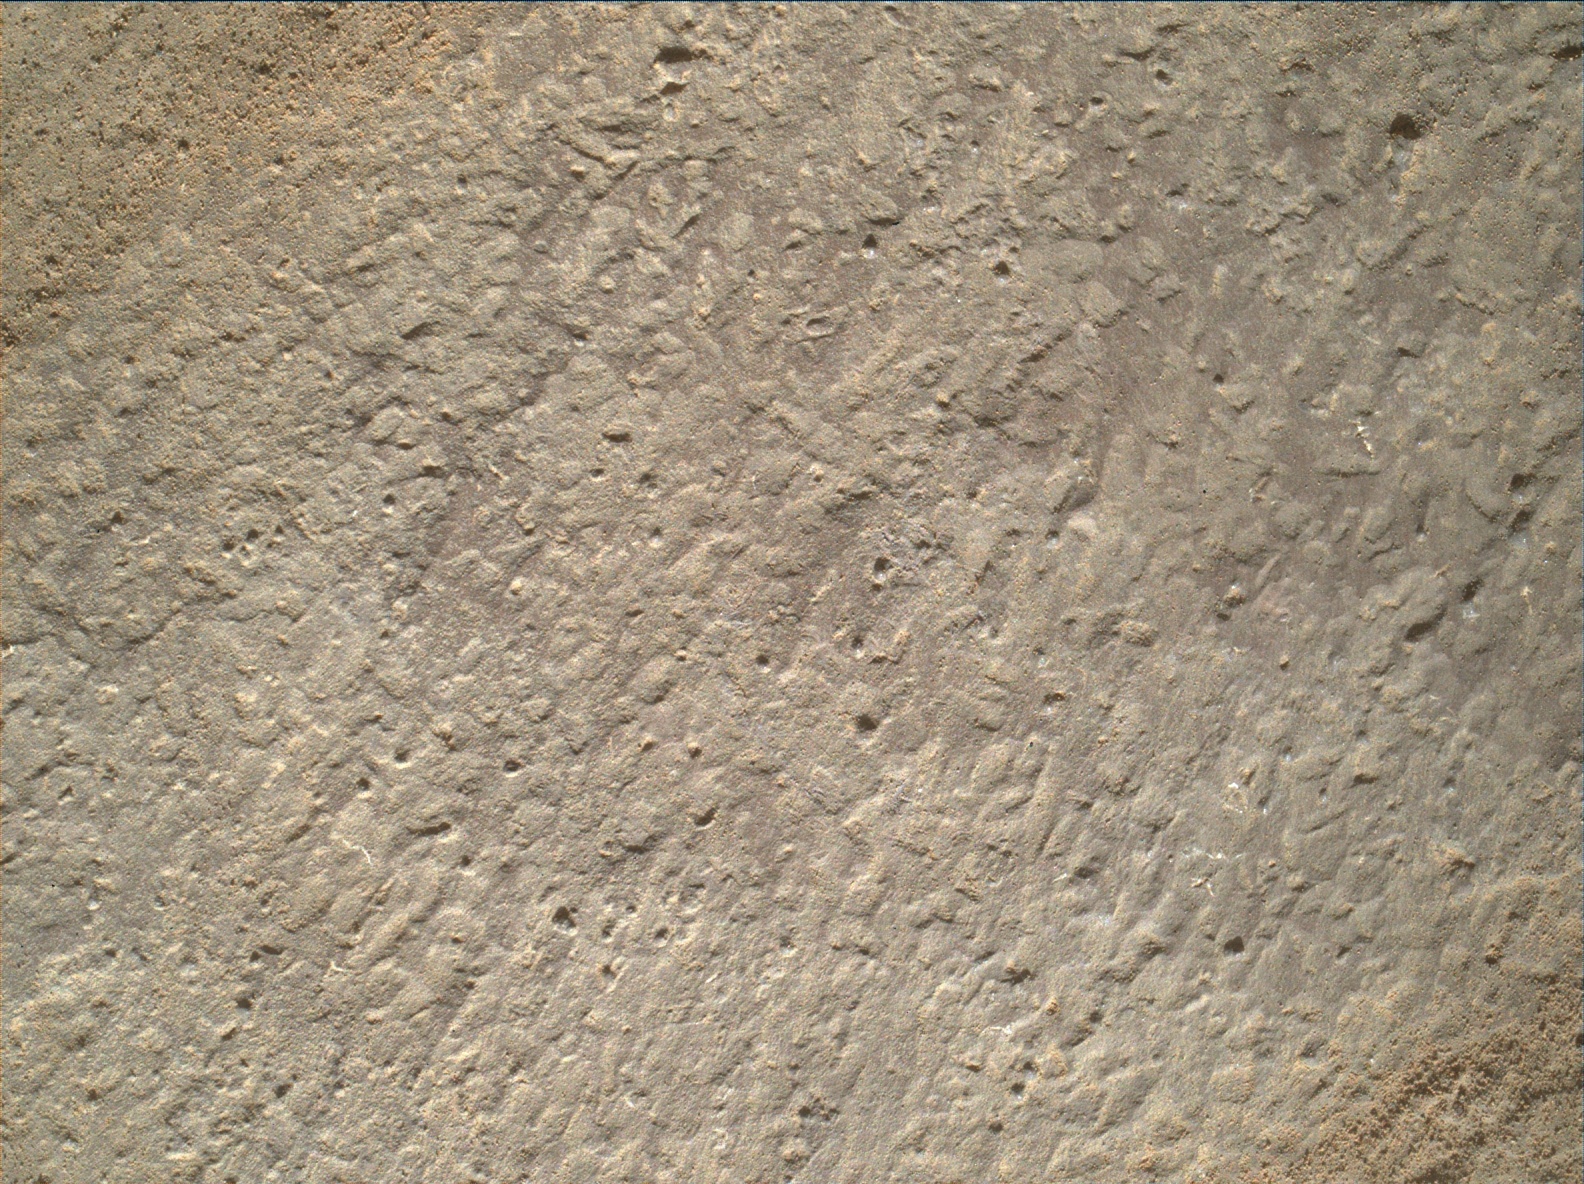 Nasa's Mars rover Curiosity acquired this image using its Mars Hand Lens Imager (MAHLI) on Sol 1246